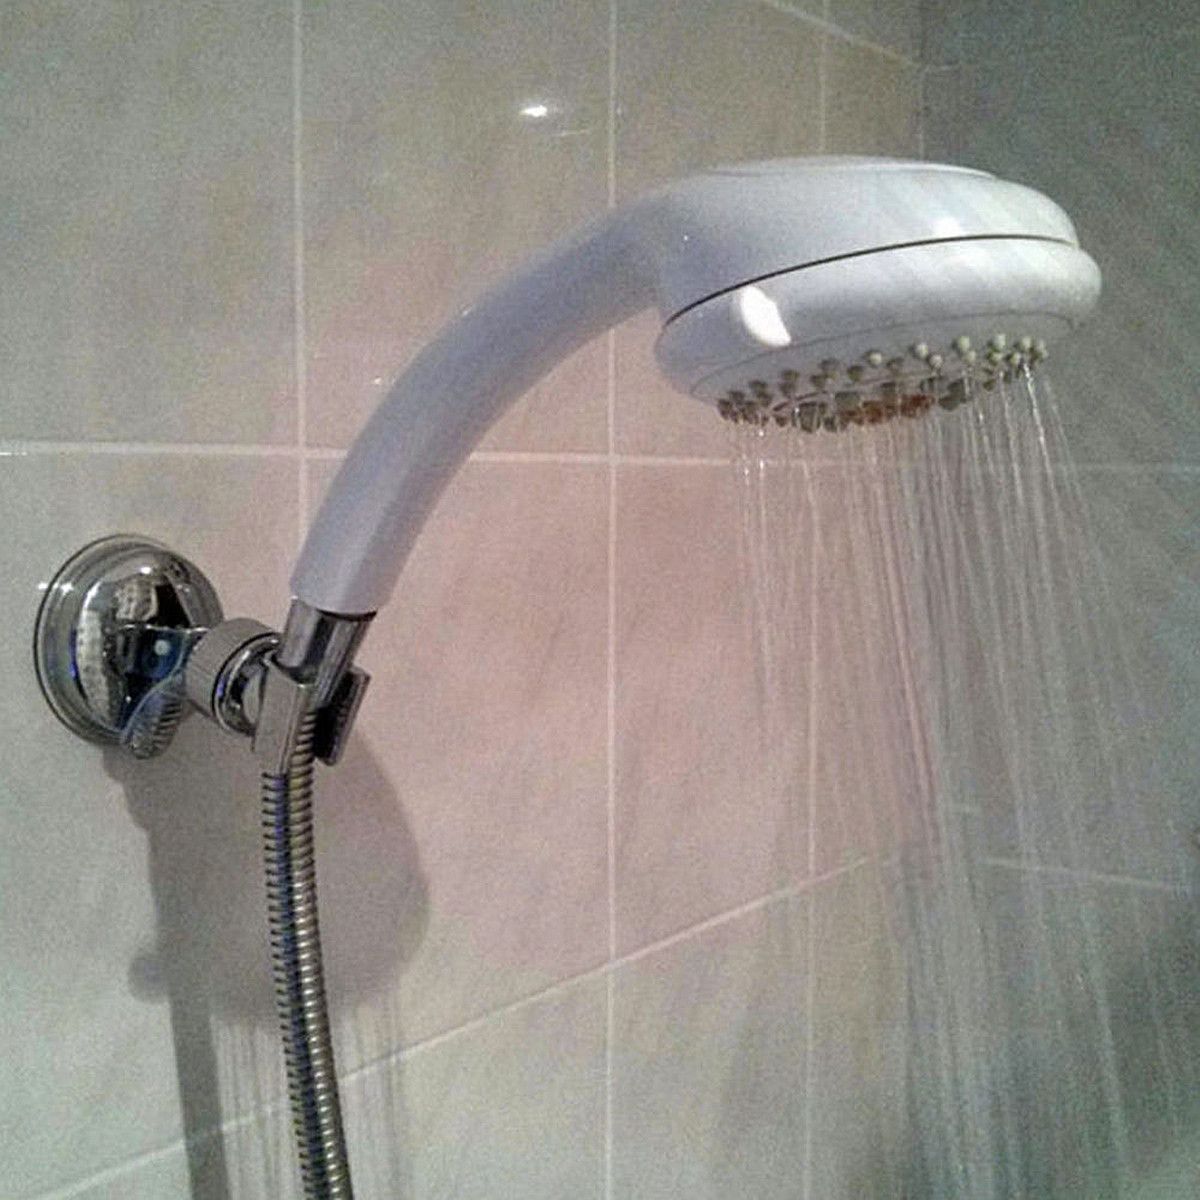 Adjustable-ABS-Plastic-Shower-Head-Holder-With-Suction-Cup-Wall-Handheld-Shower-Water-Hose-Bracket-1305583